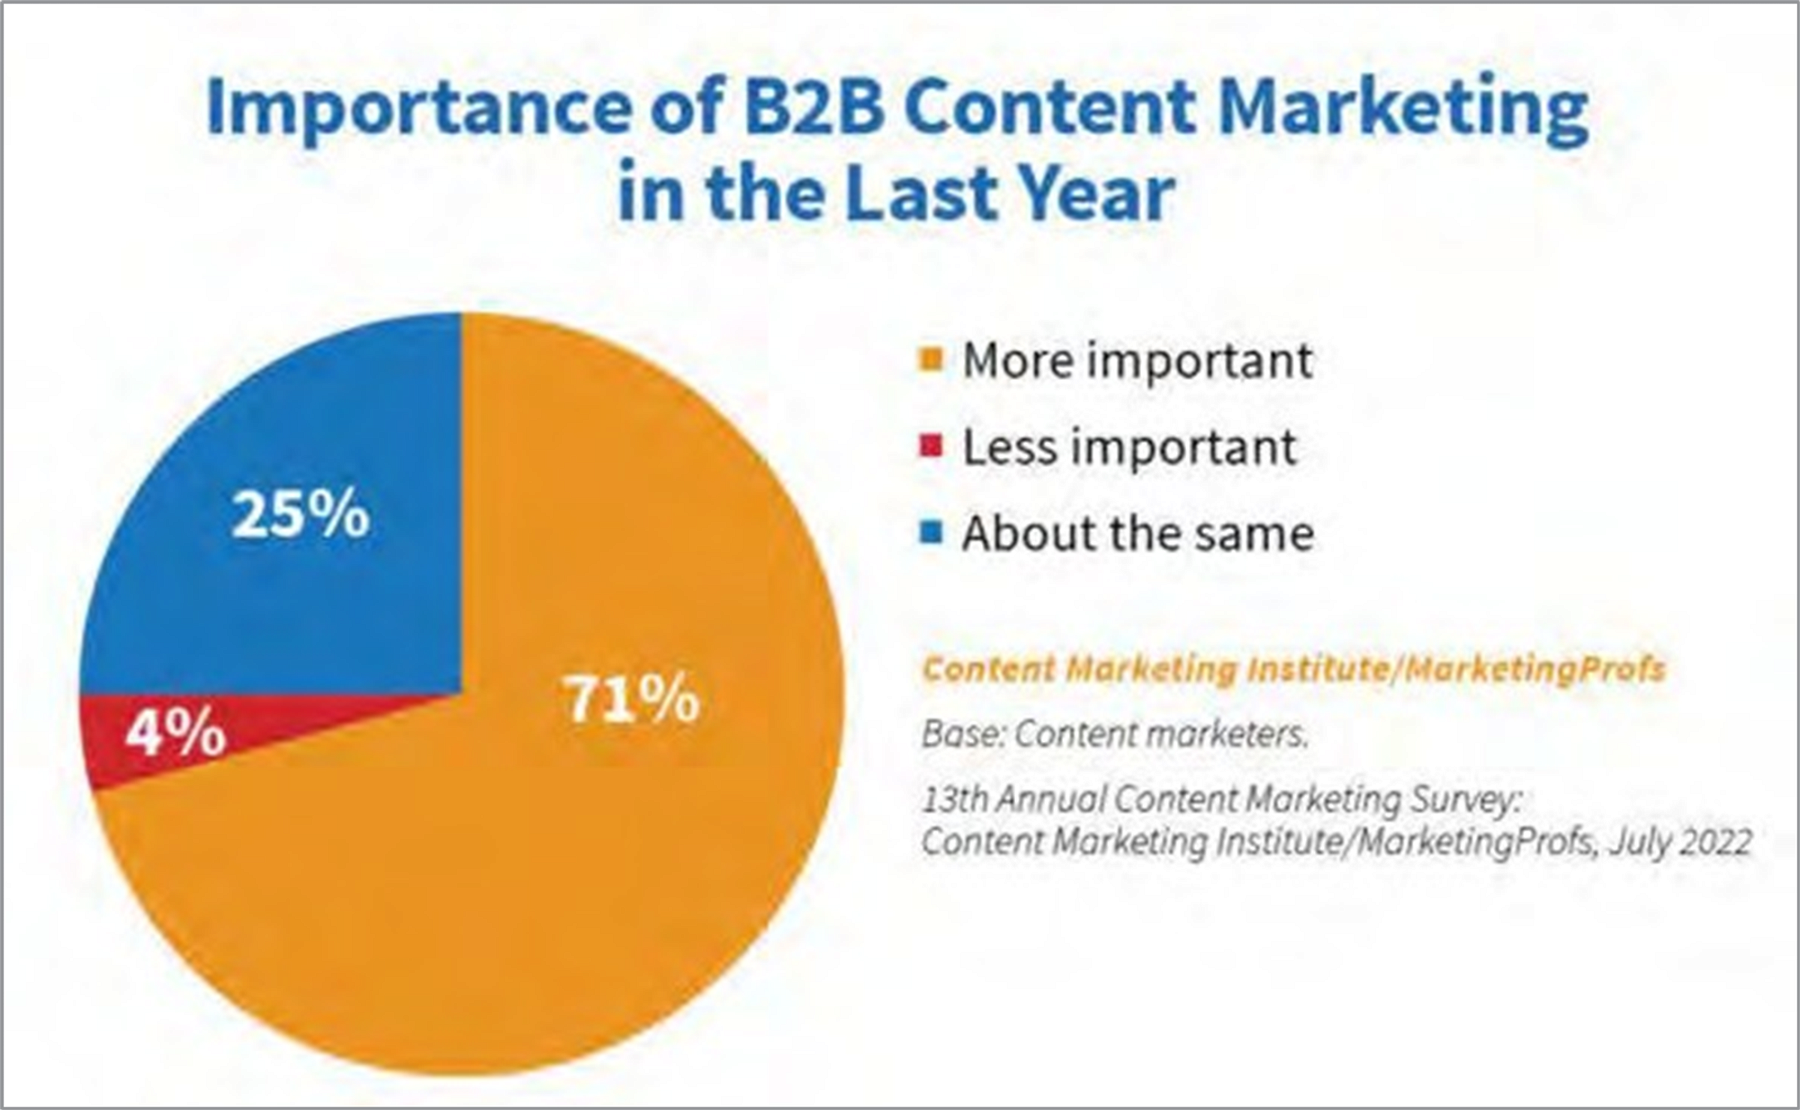 Graphic: Importance of B2B Content Marketing in the Last Year | Source: Content Marketing Institute